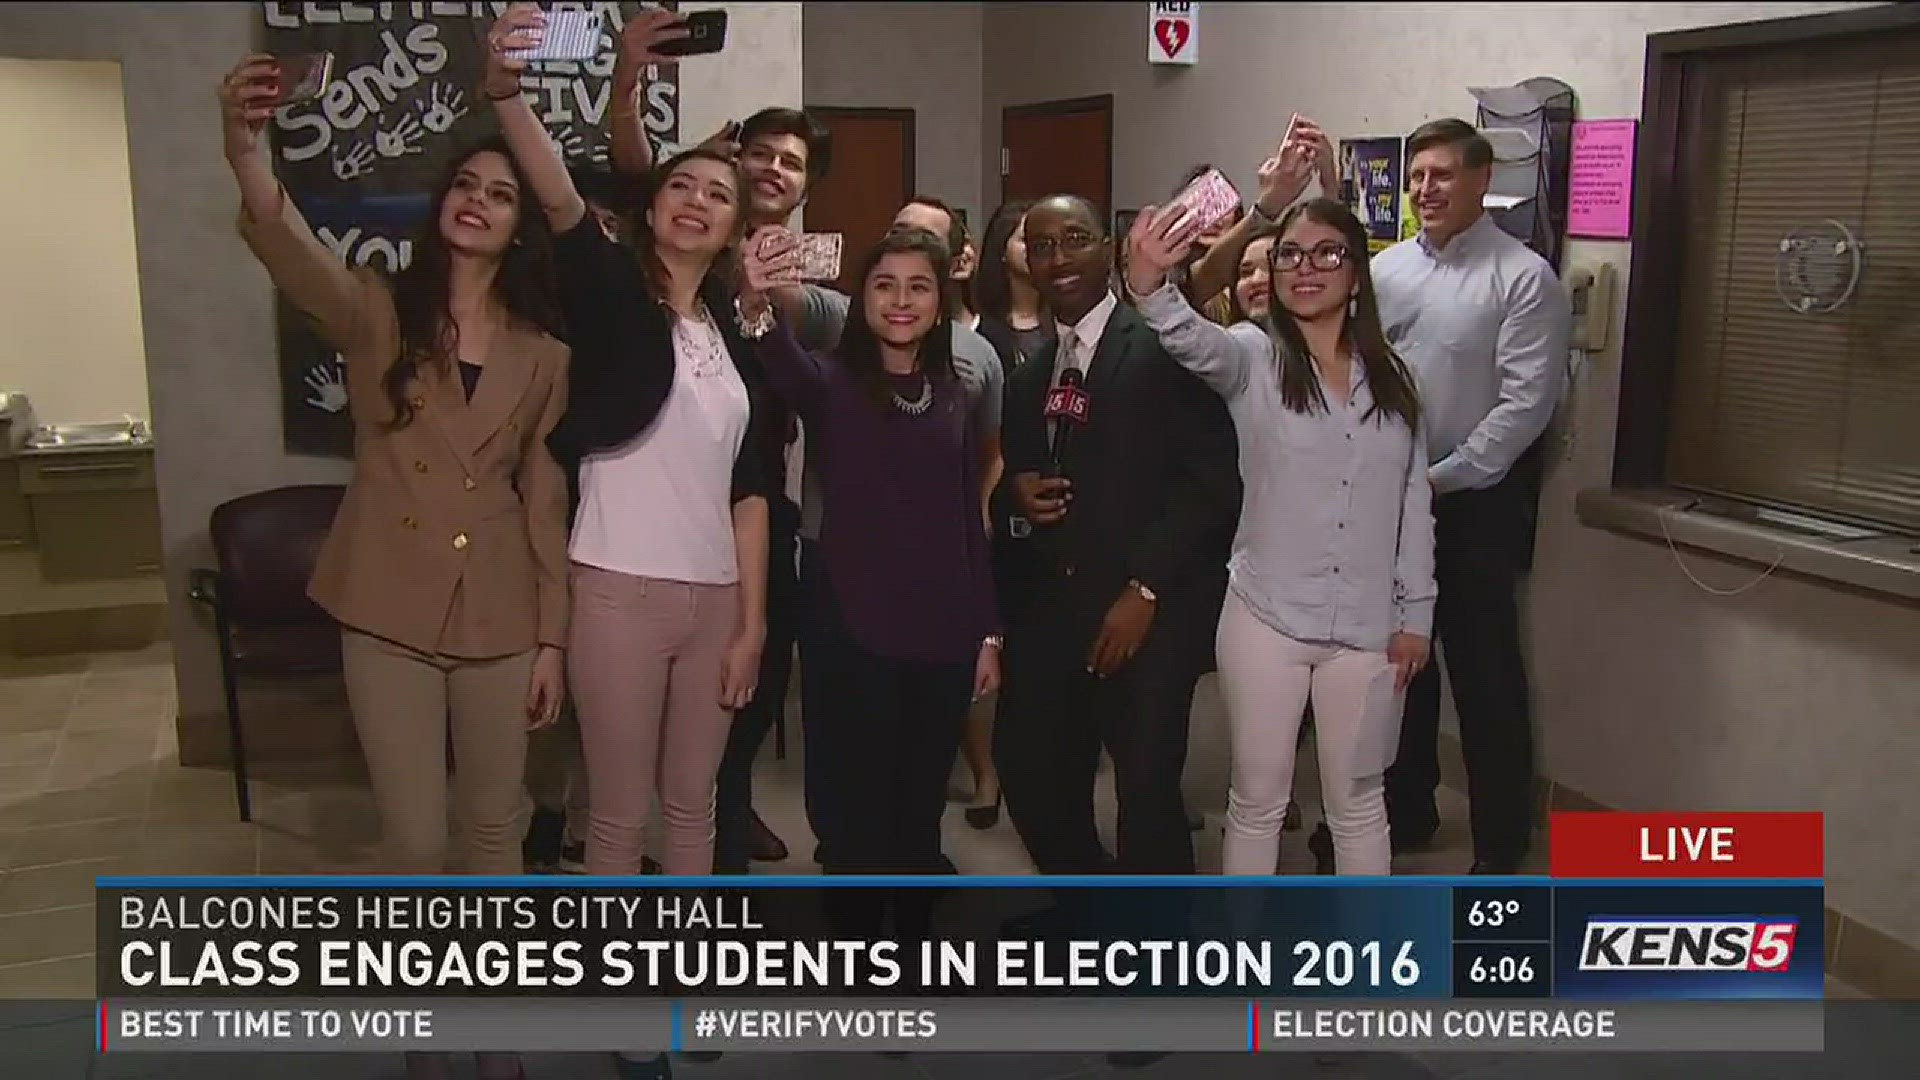 Class engages students in election 2016